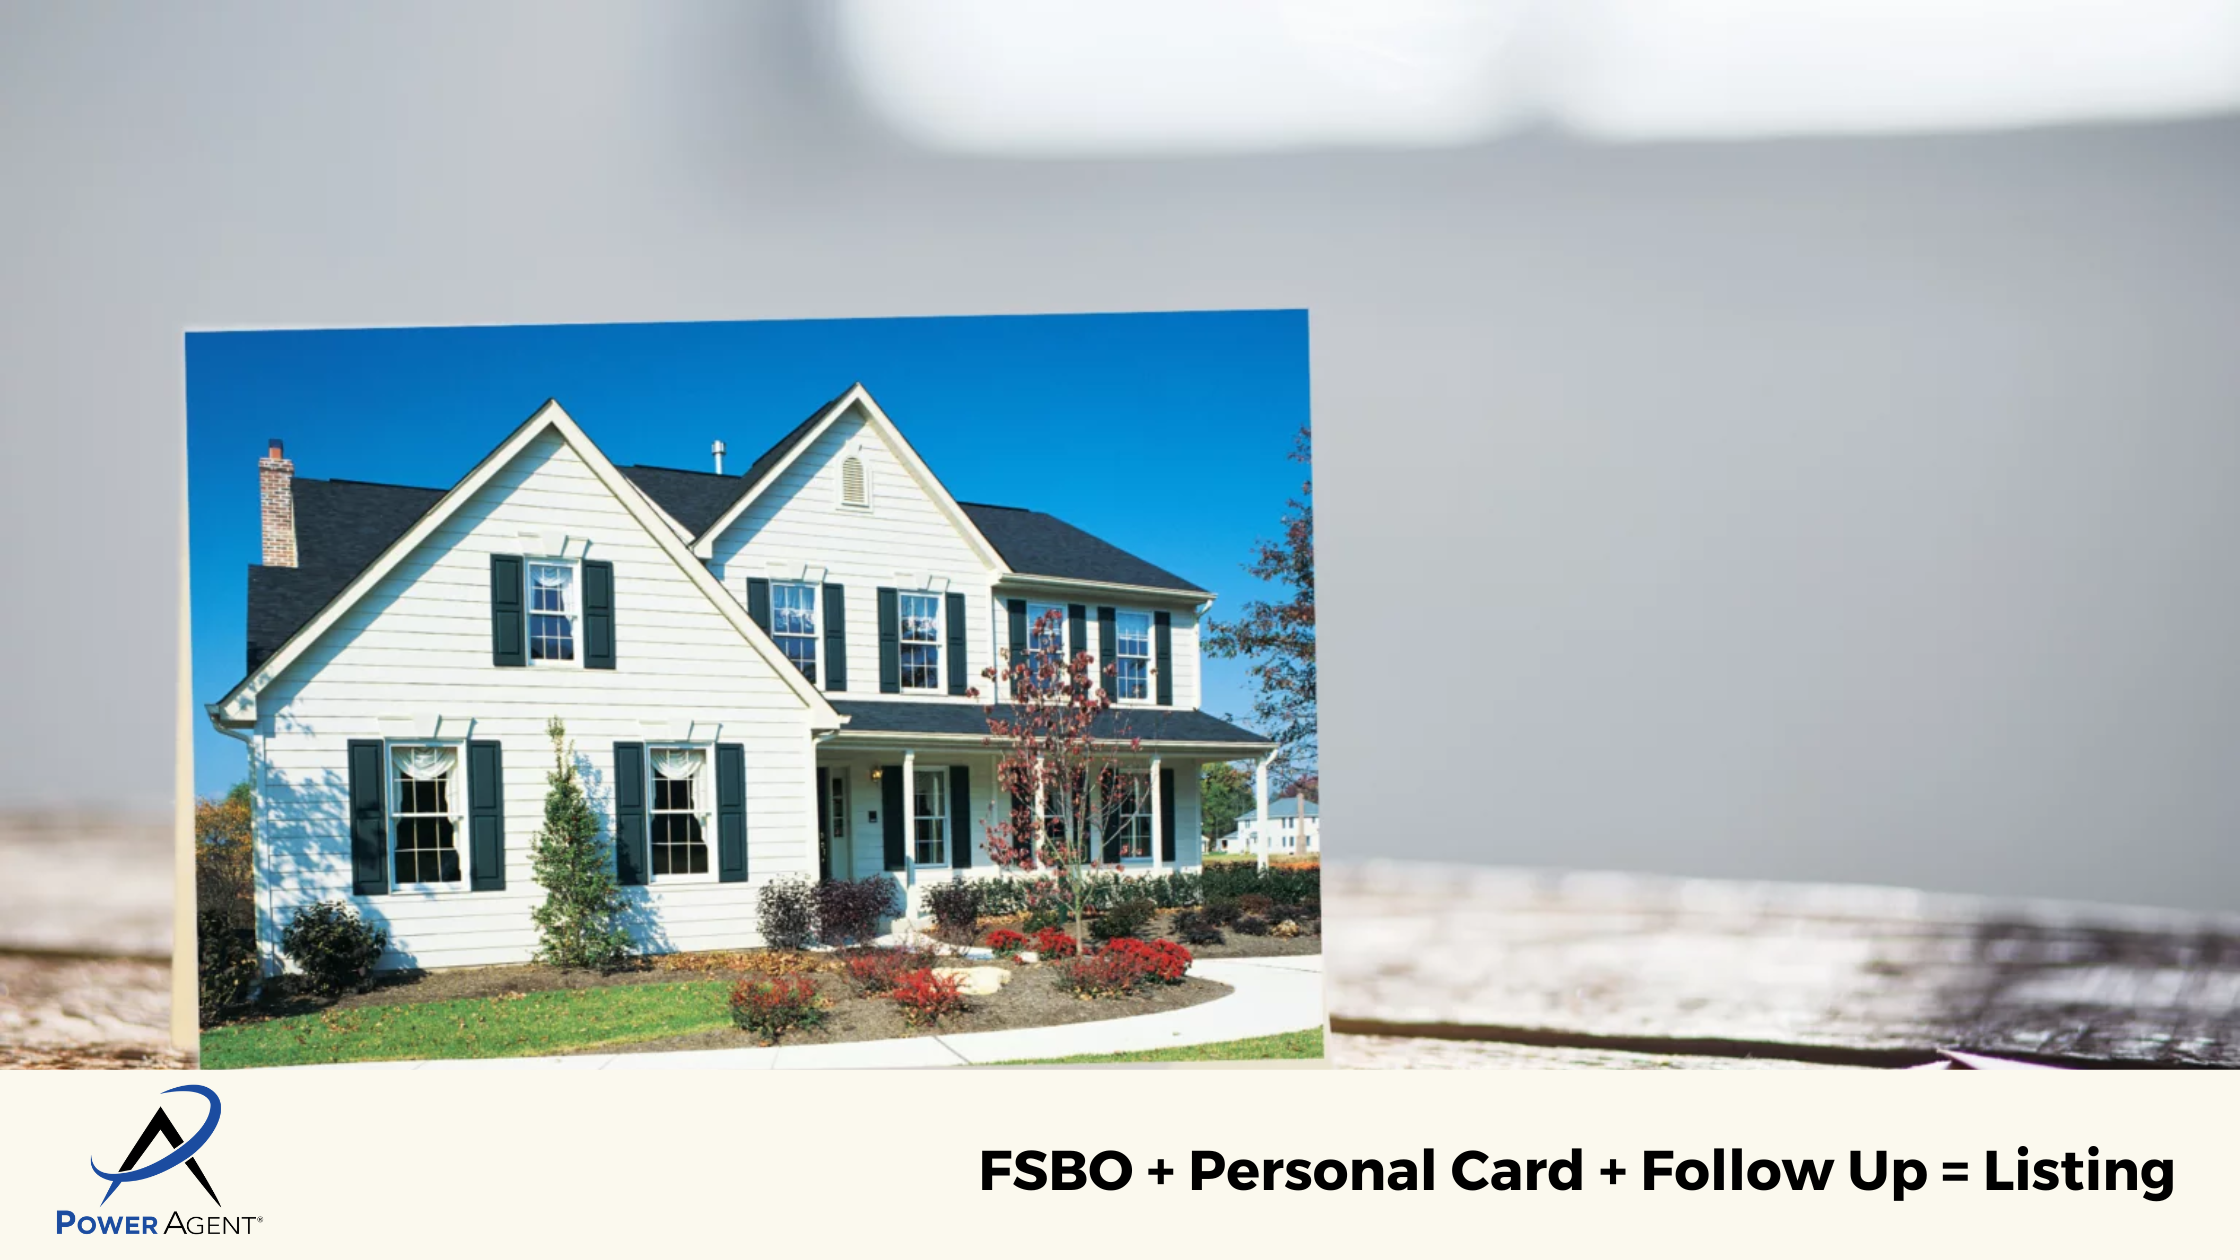 FSBO + Personal Card + Follow Up = Listing